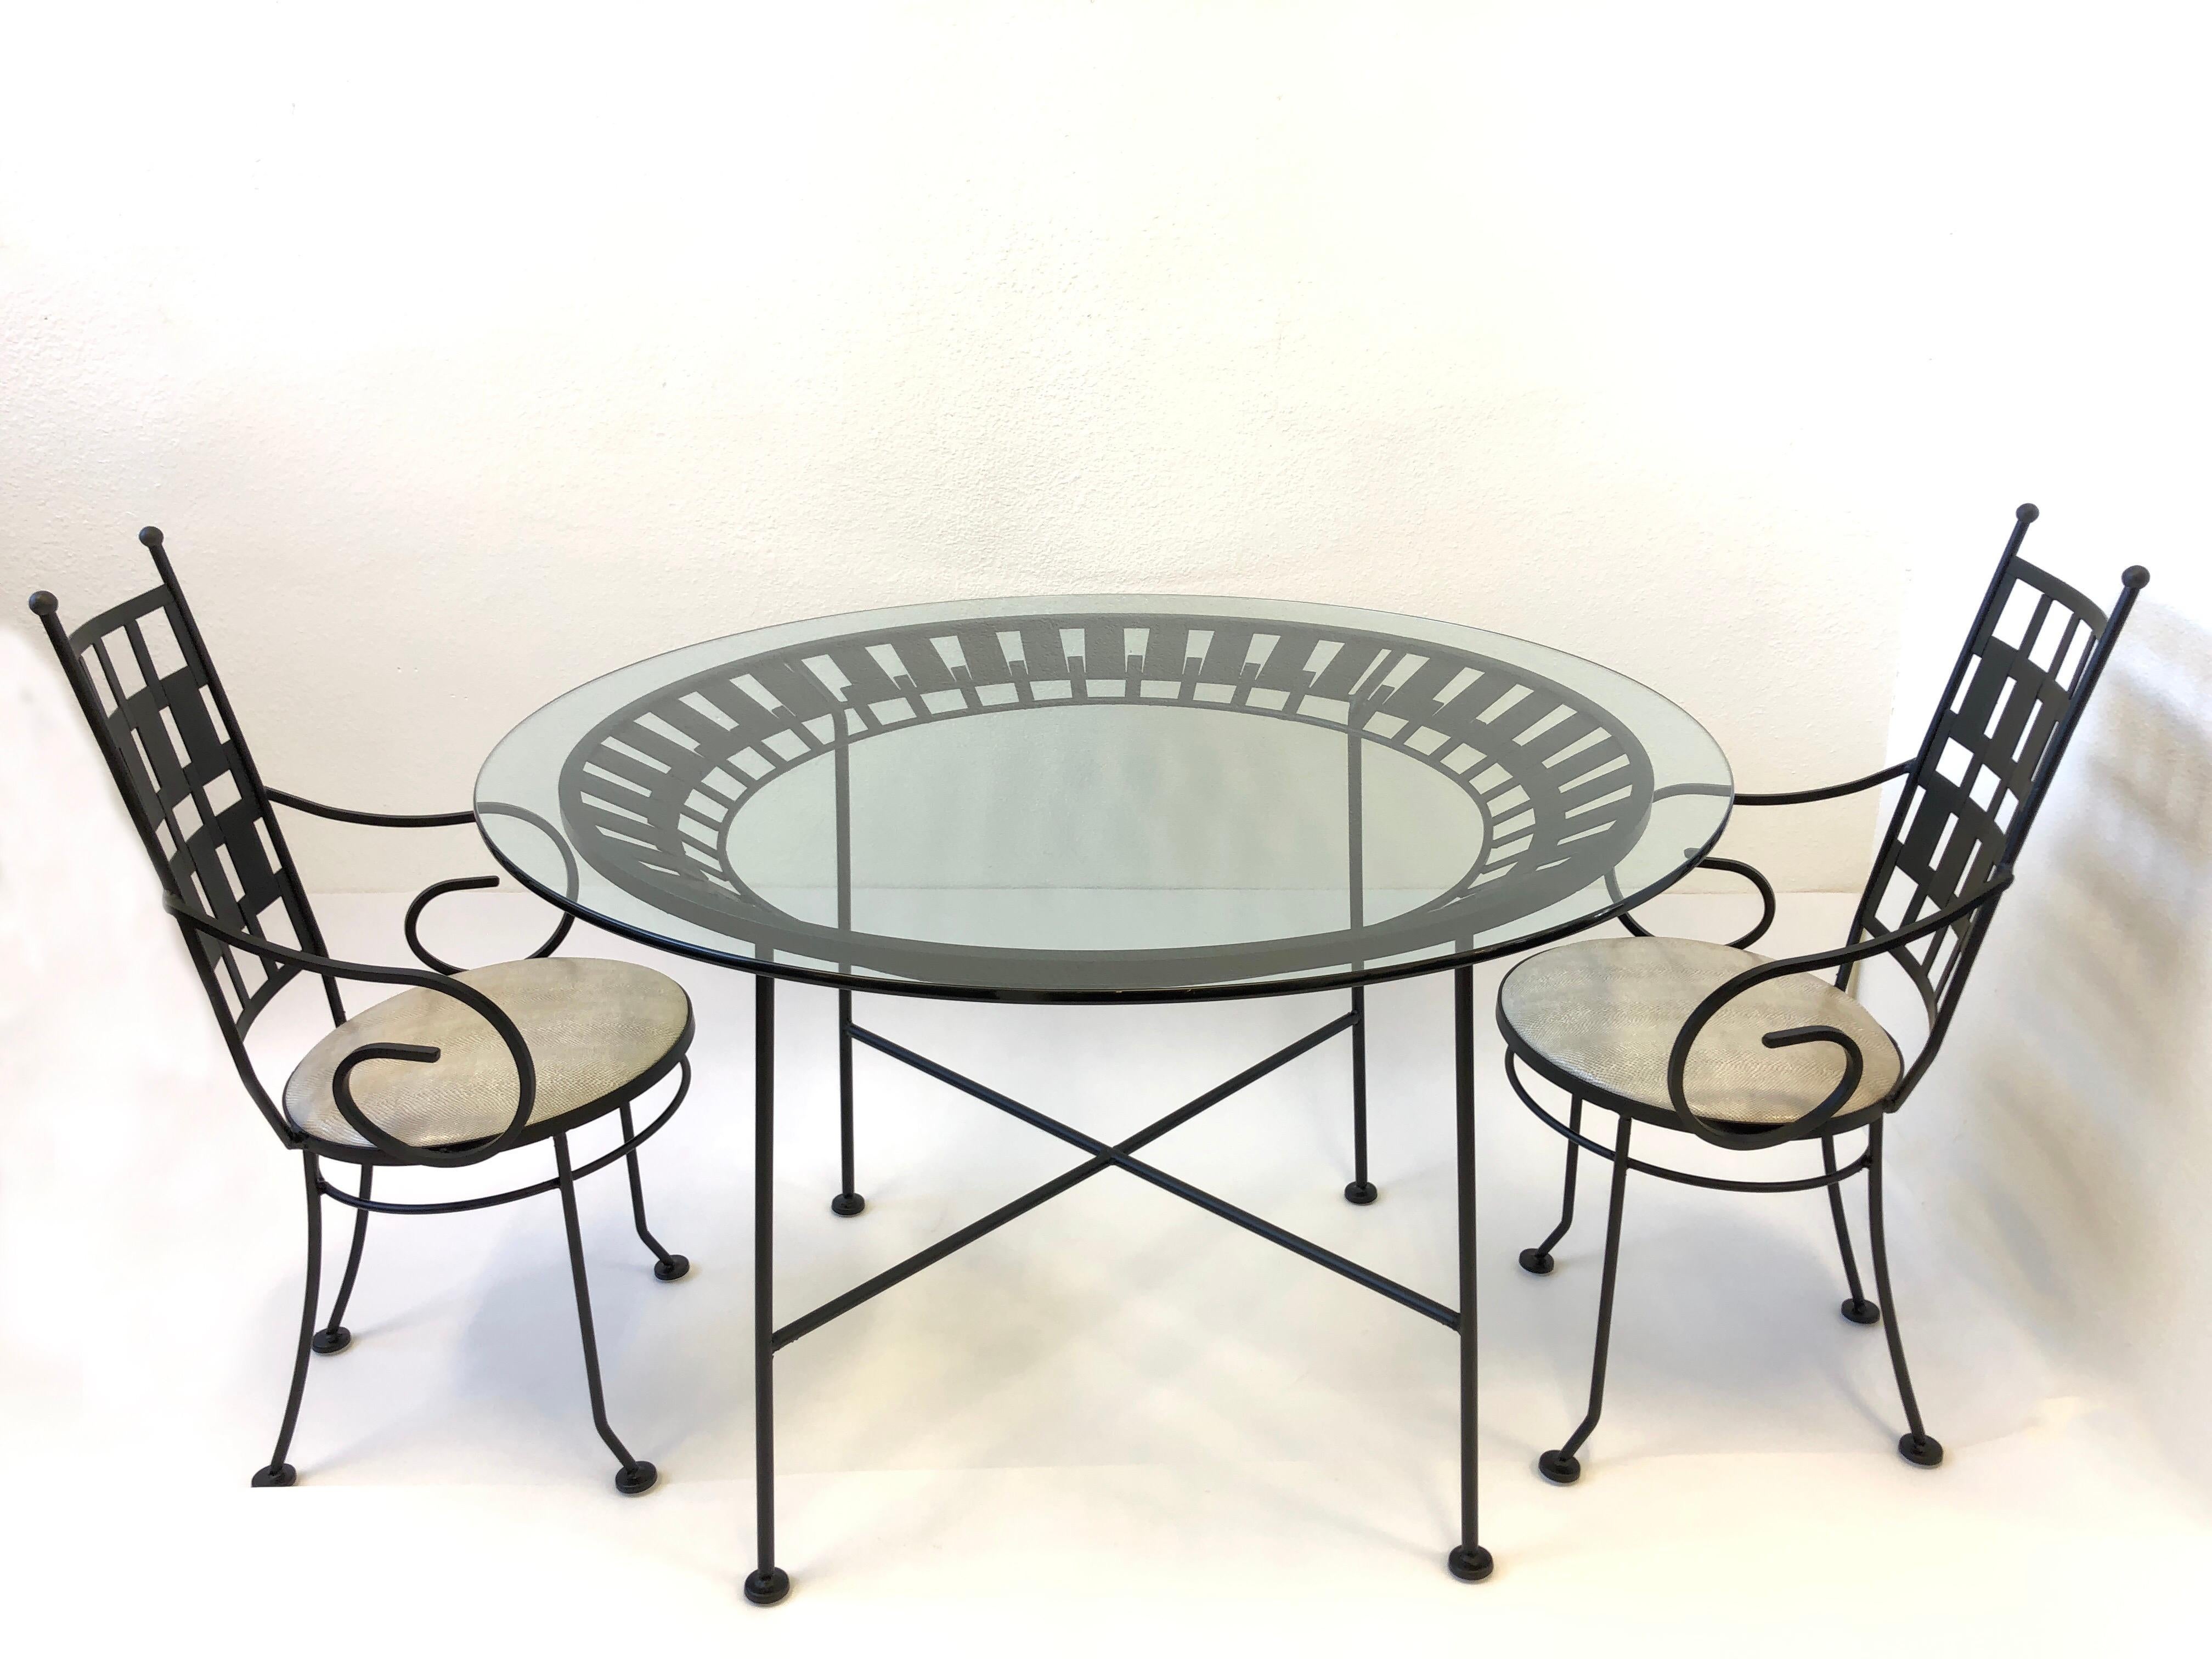 Glamorous high back armchair and table design by Arthur Unamoff in the 1960s. The set is constructed of steel that has been newly powder coated satin black, new 48” diameter 1/2” thick glass top and seats on chairs are newly recovered in a off-white